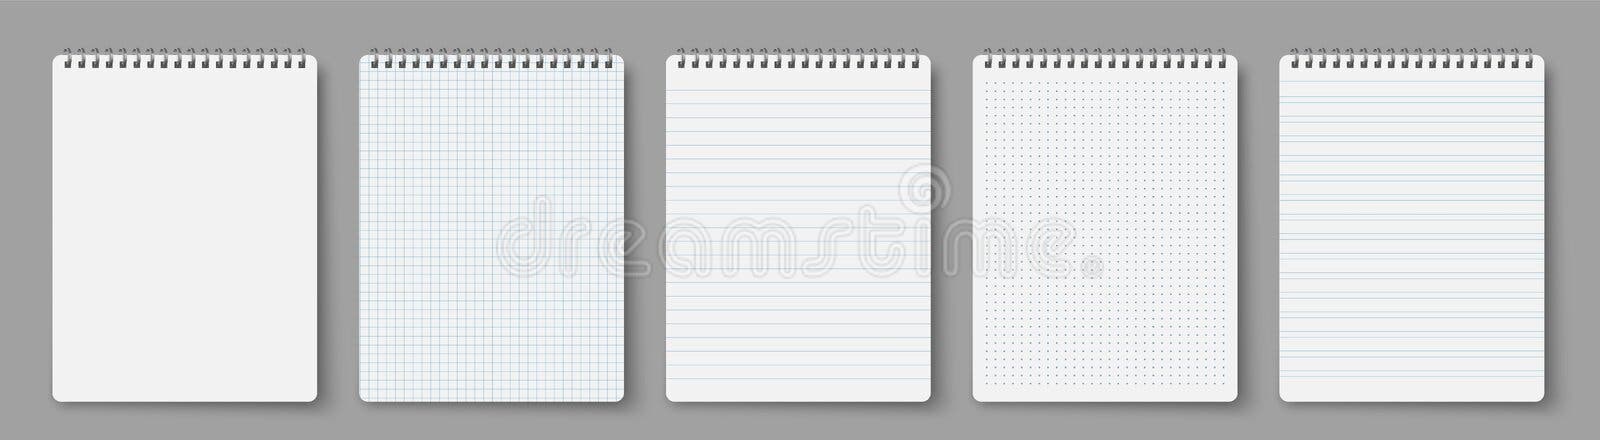 Blank Squared Notebook Sheet Stock Photo - Image of note, isolated: 6741854